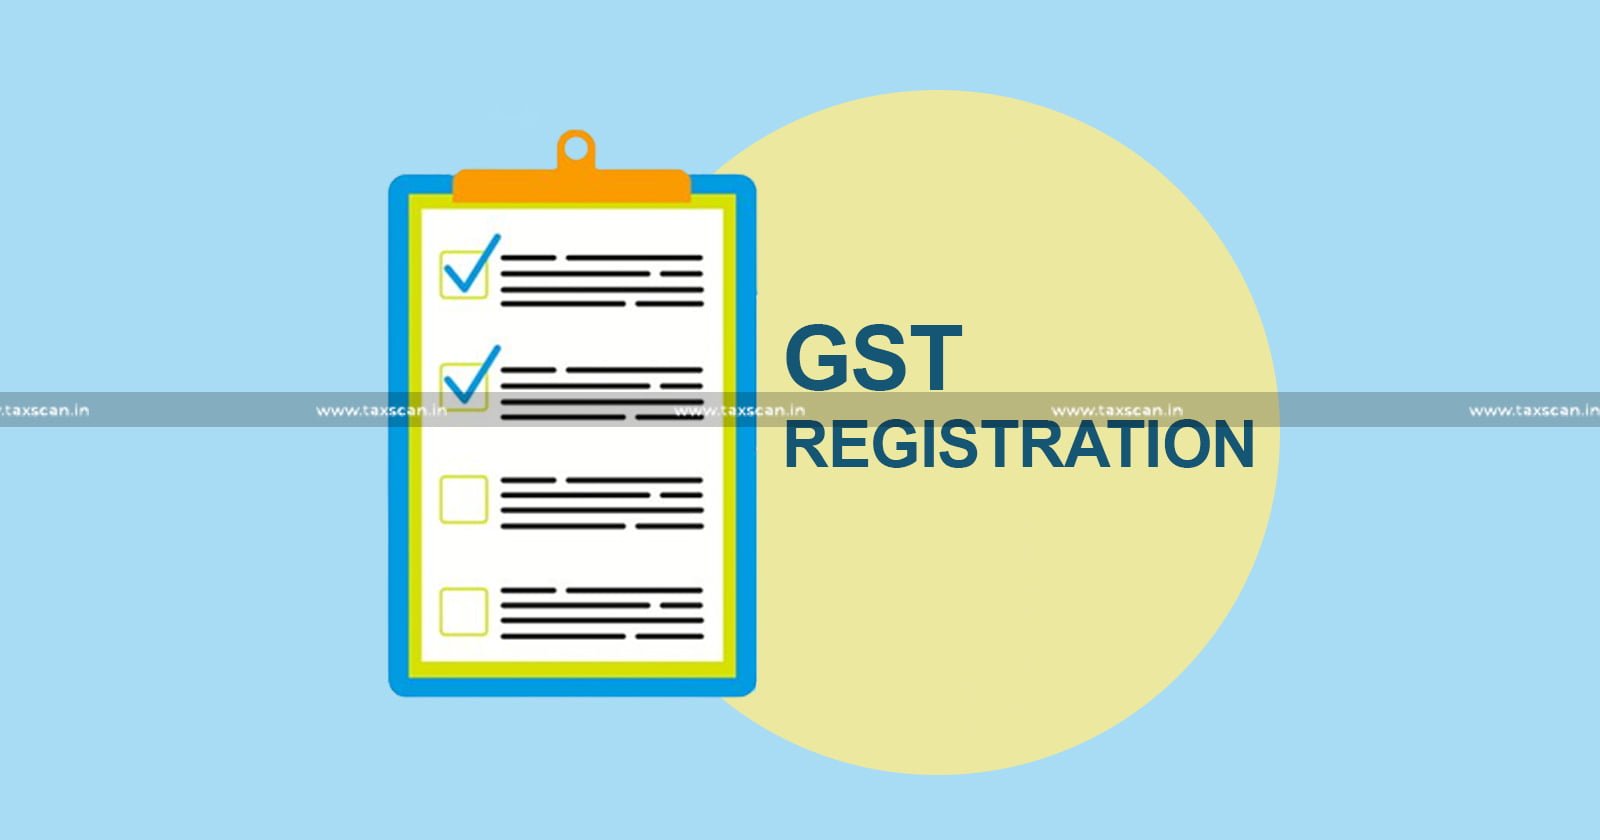 GST Registration in Name of Petitioner - GST Registration - Name of Petitioner - Business of Prohibited Drugs - Himachal Pradesh Highcourt Dismisses Anticipatory Bail -Anticipatory Bail - taxscan